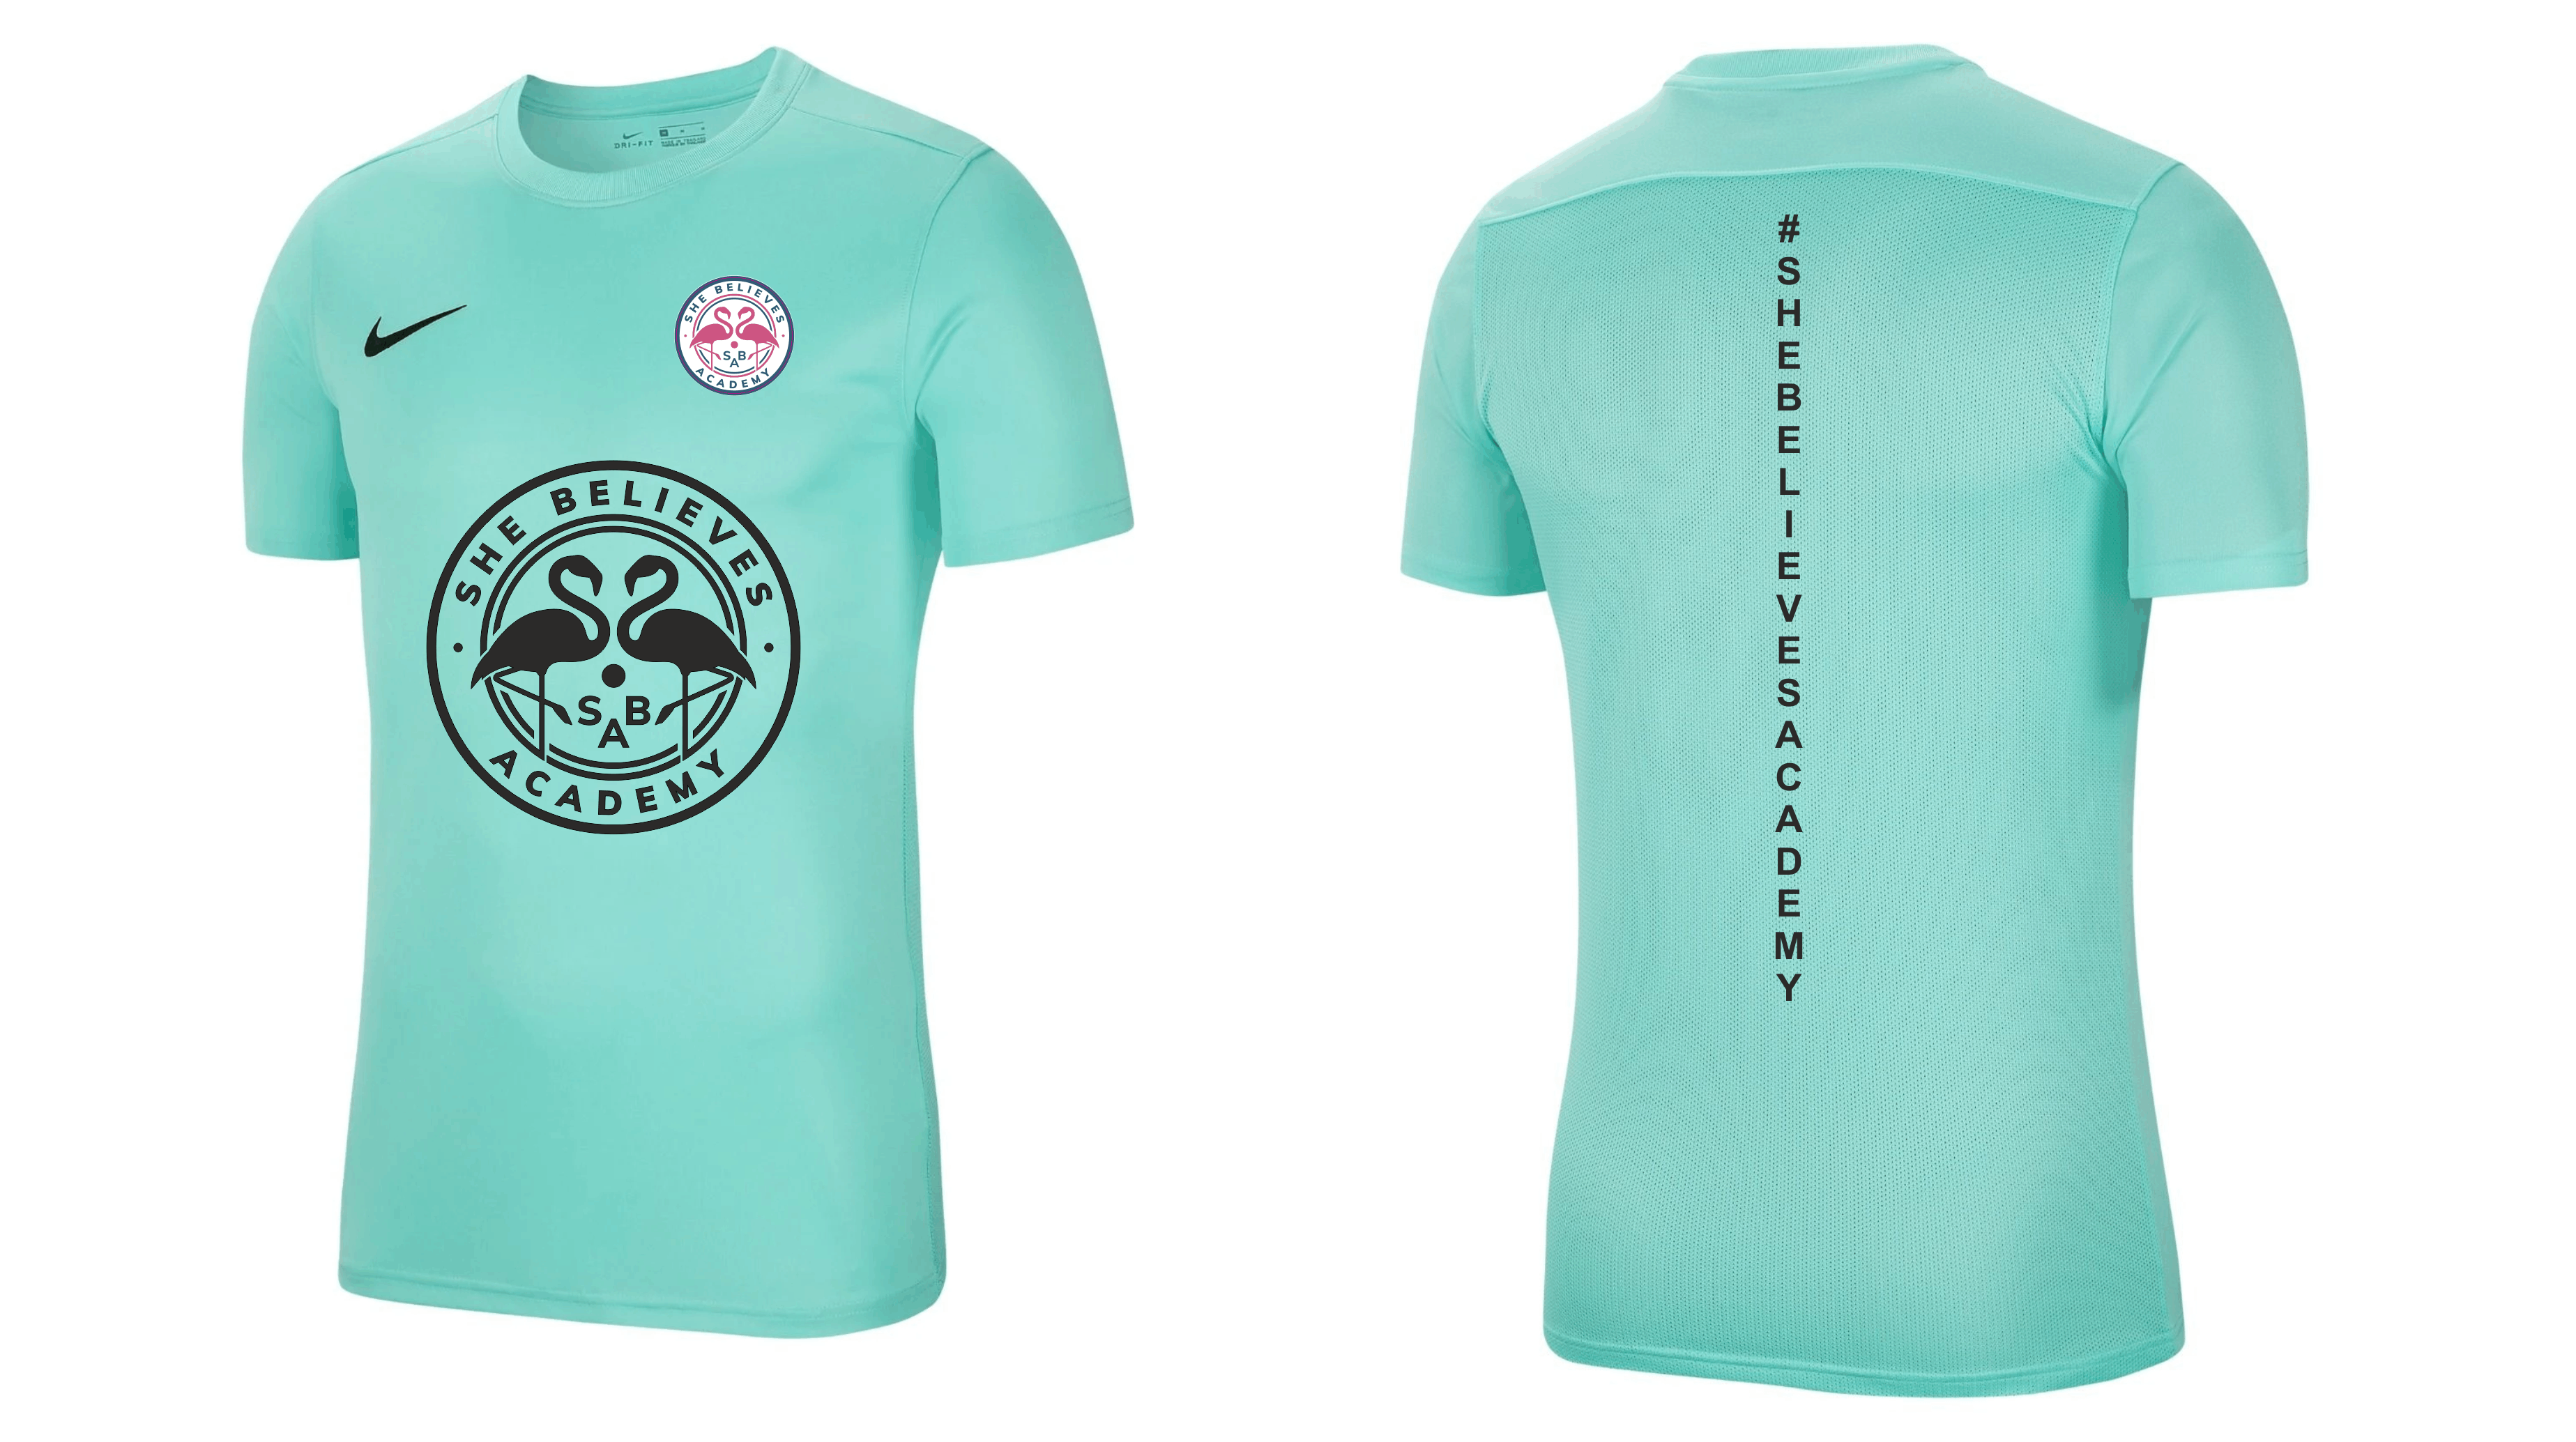 She Believes Academy - Nike training top, Hyper Turquoise.